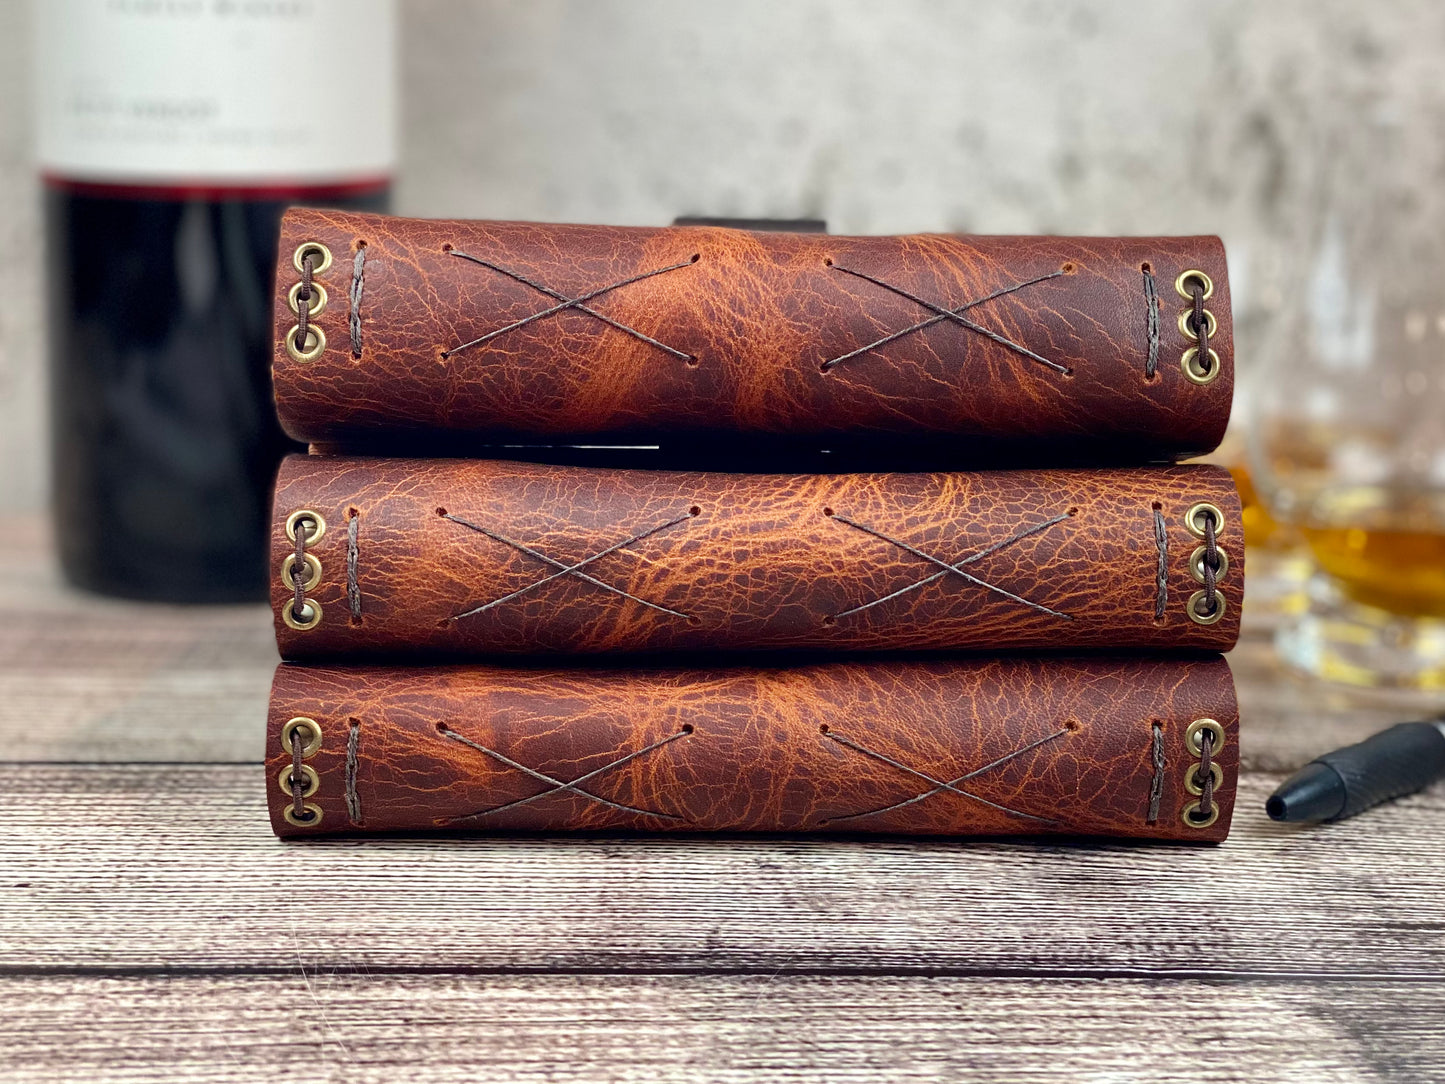 Refillable Journal for Whiskey, Bourbon, Wine or Beer Notes